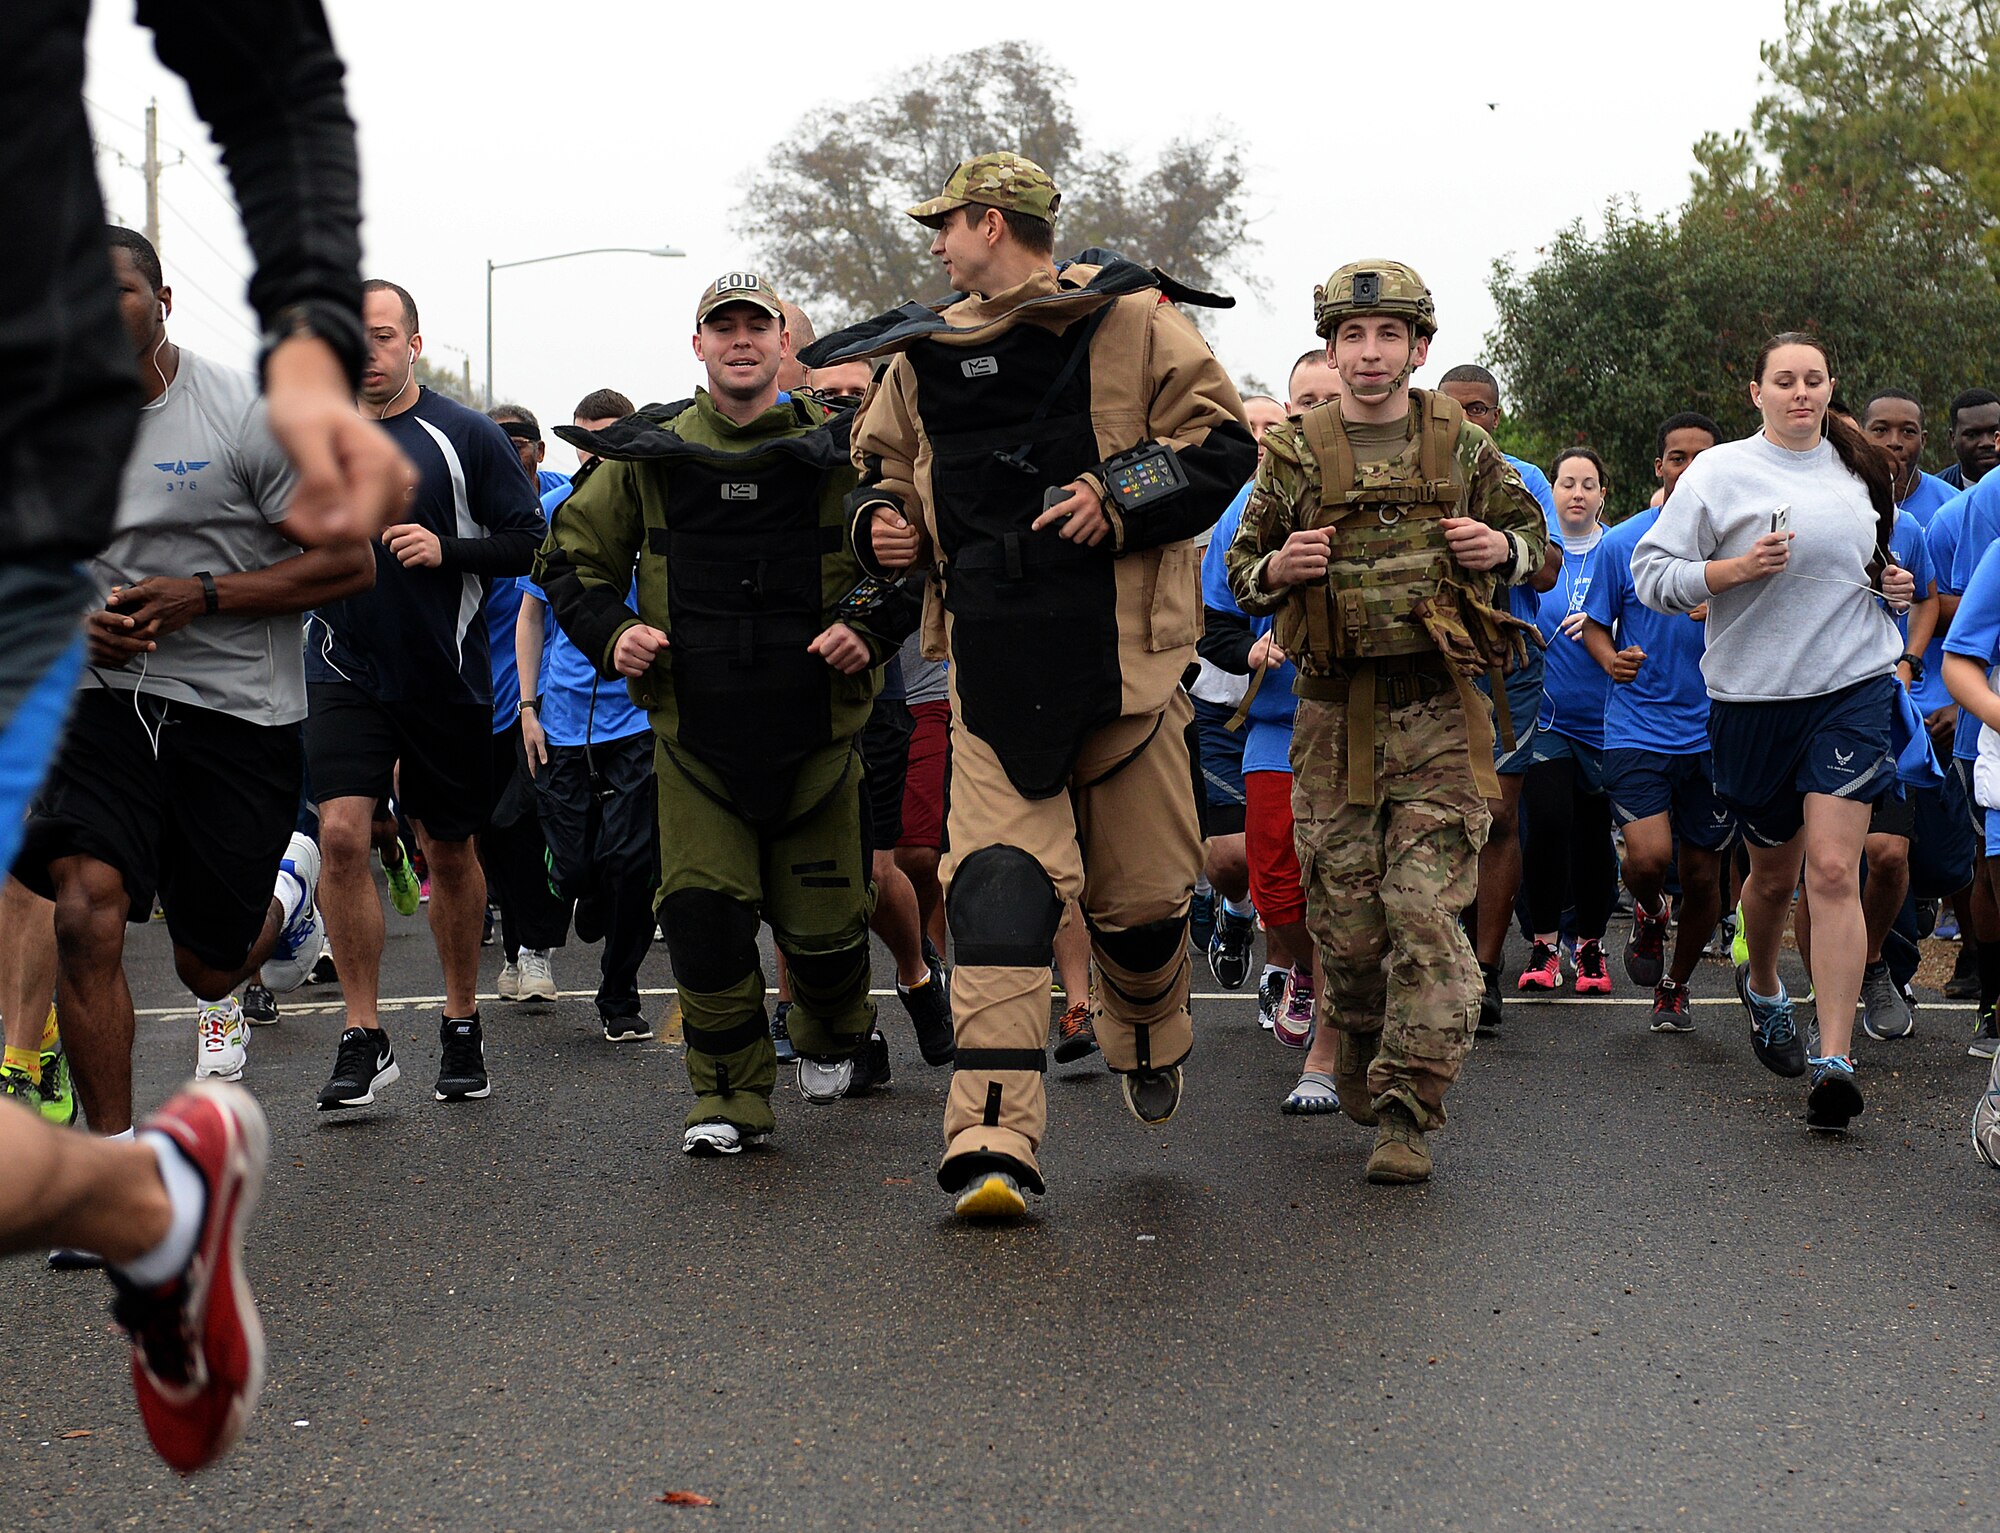 Airmen from the 2nd Civil Engineer Squadron Explosive Ordnance Disposal flight begin the SrA Bryan R. Bell 5K Memorial Run on Barksdale Air Force Base, La., Dec. 5, 2014. Bell, 2 CES EOD technician, tragically lost his life from injuries sustained when his vehicle struck an improvised explosive device while supporting Operation Enduring Freedom in Afghanistan Jan. 5, 2012. (U.S. Air Force photo/Airman 1s Class Curt Beach)